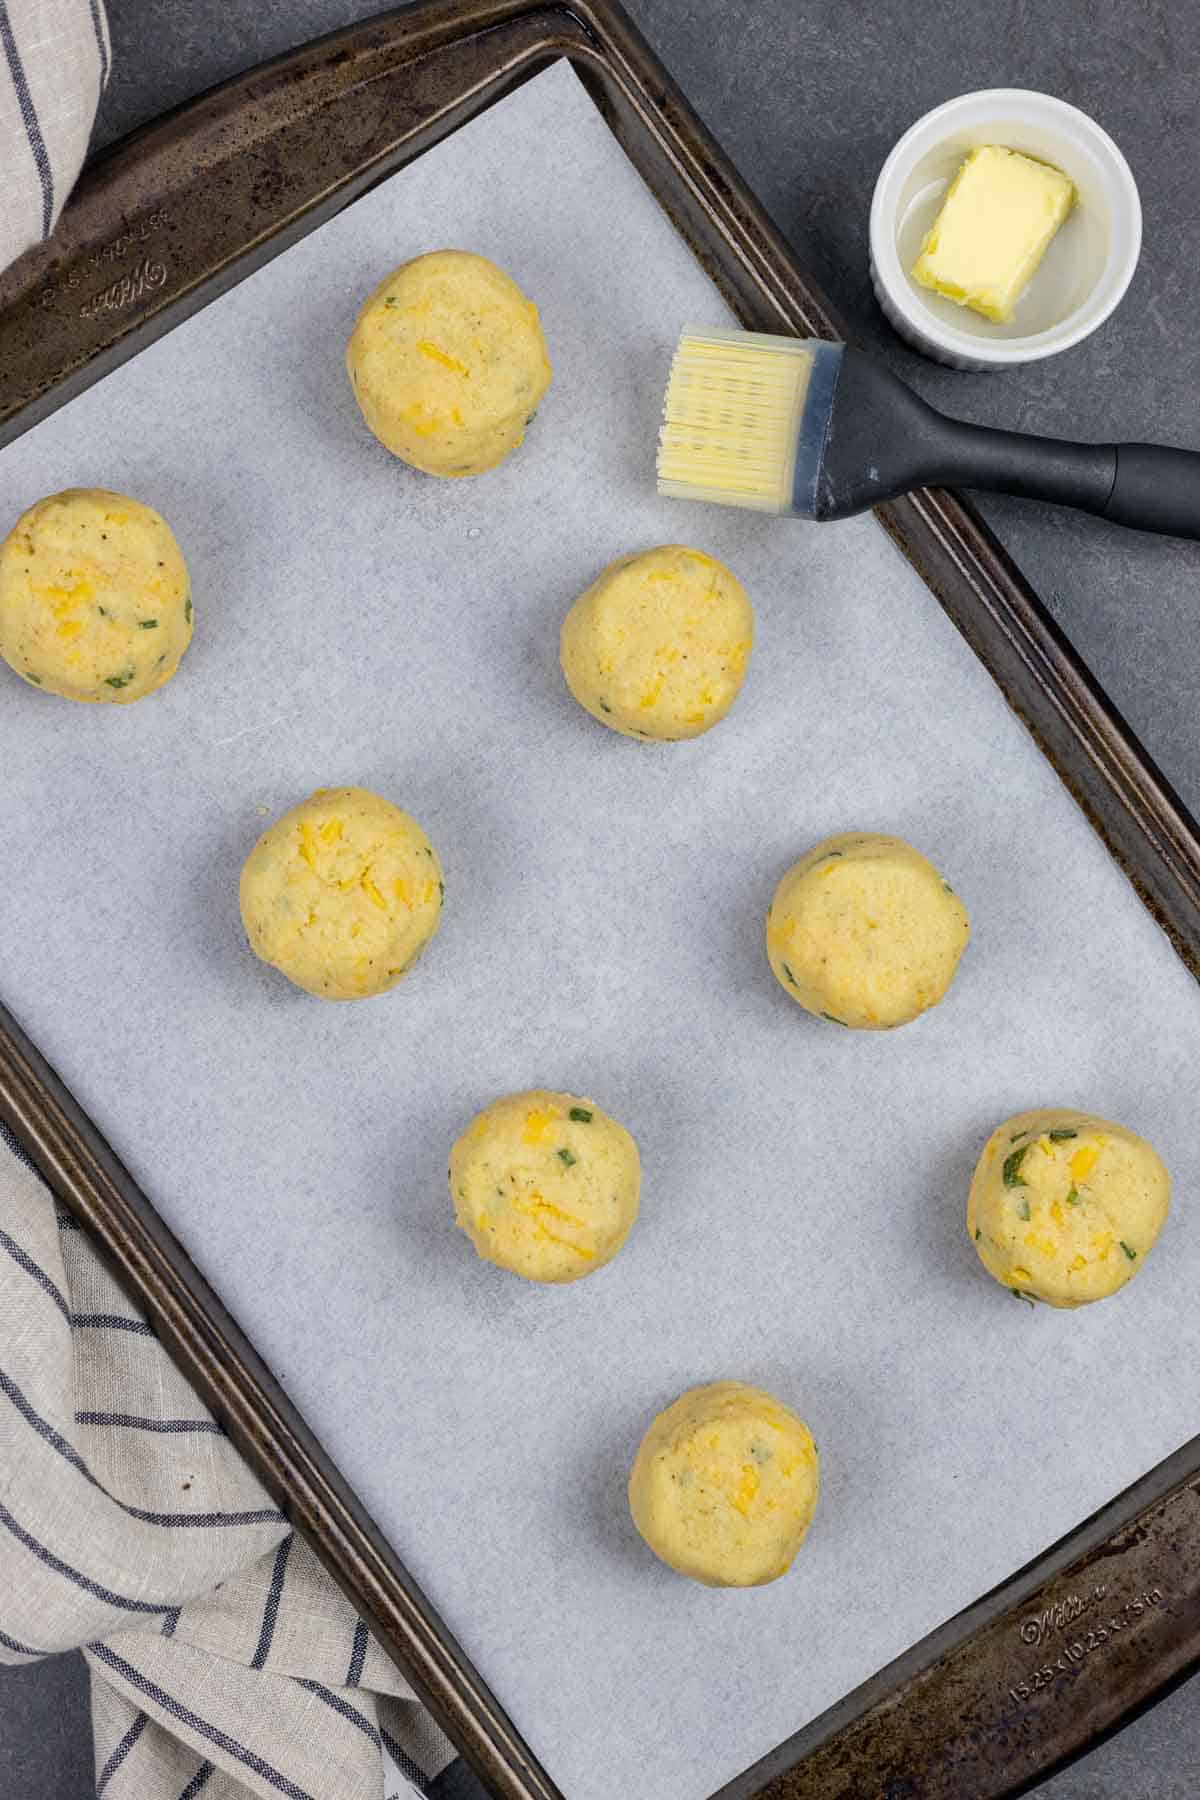 Parchment lined baking sheet with rolled biscuit dough balls with captioned instruction.